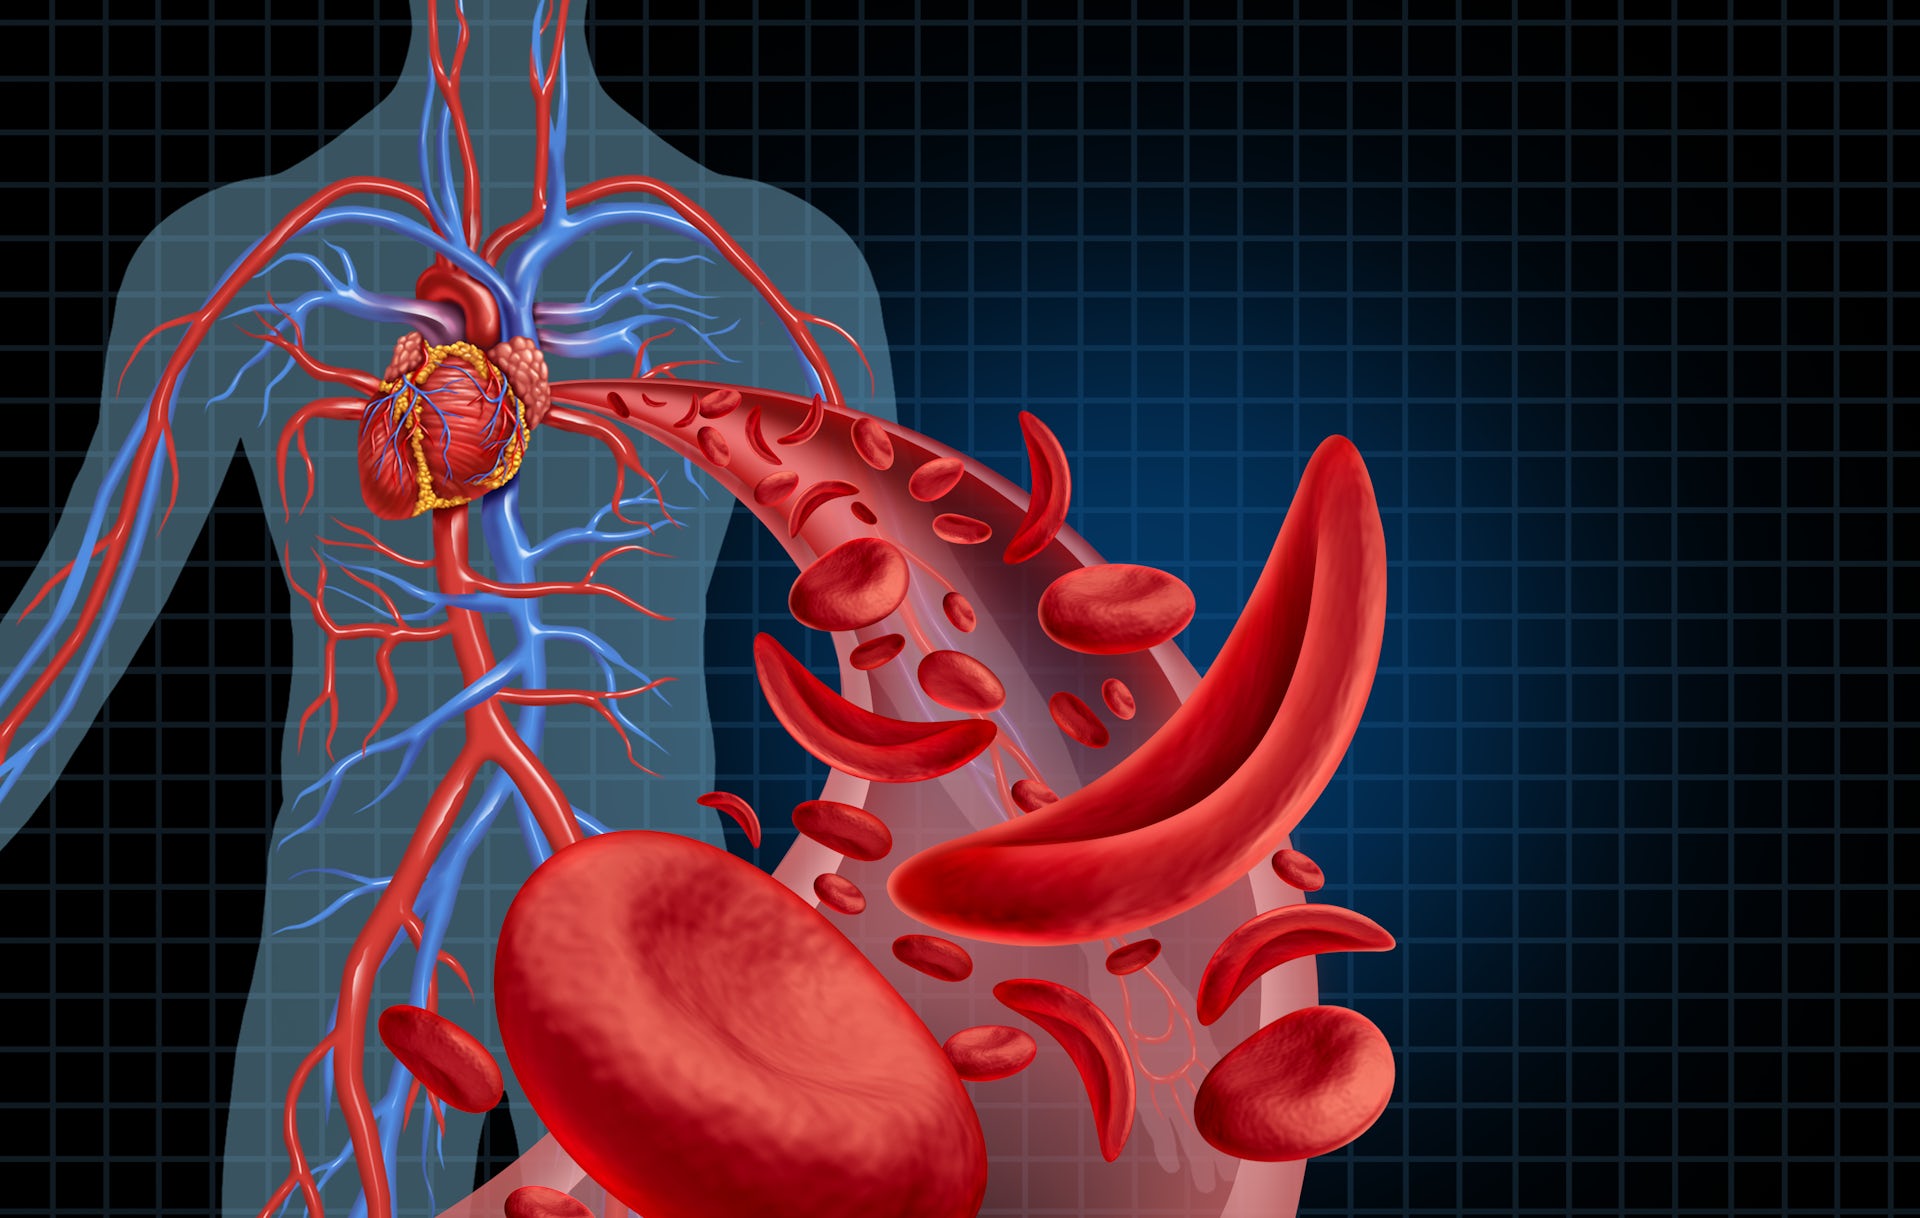 Three-dimensional illustration of human artery anatomy, showing normal red blood cells and sickle-shaped blood cells flowing away from the heart.